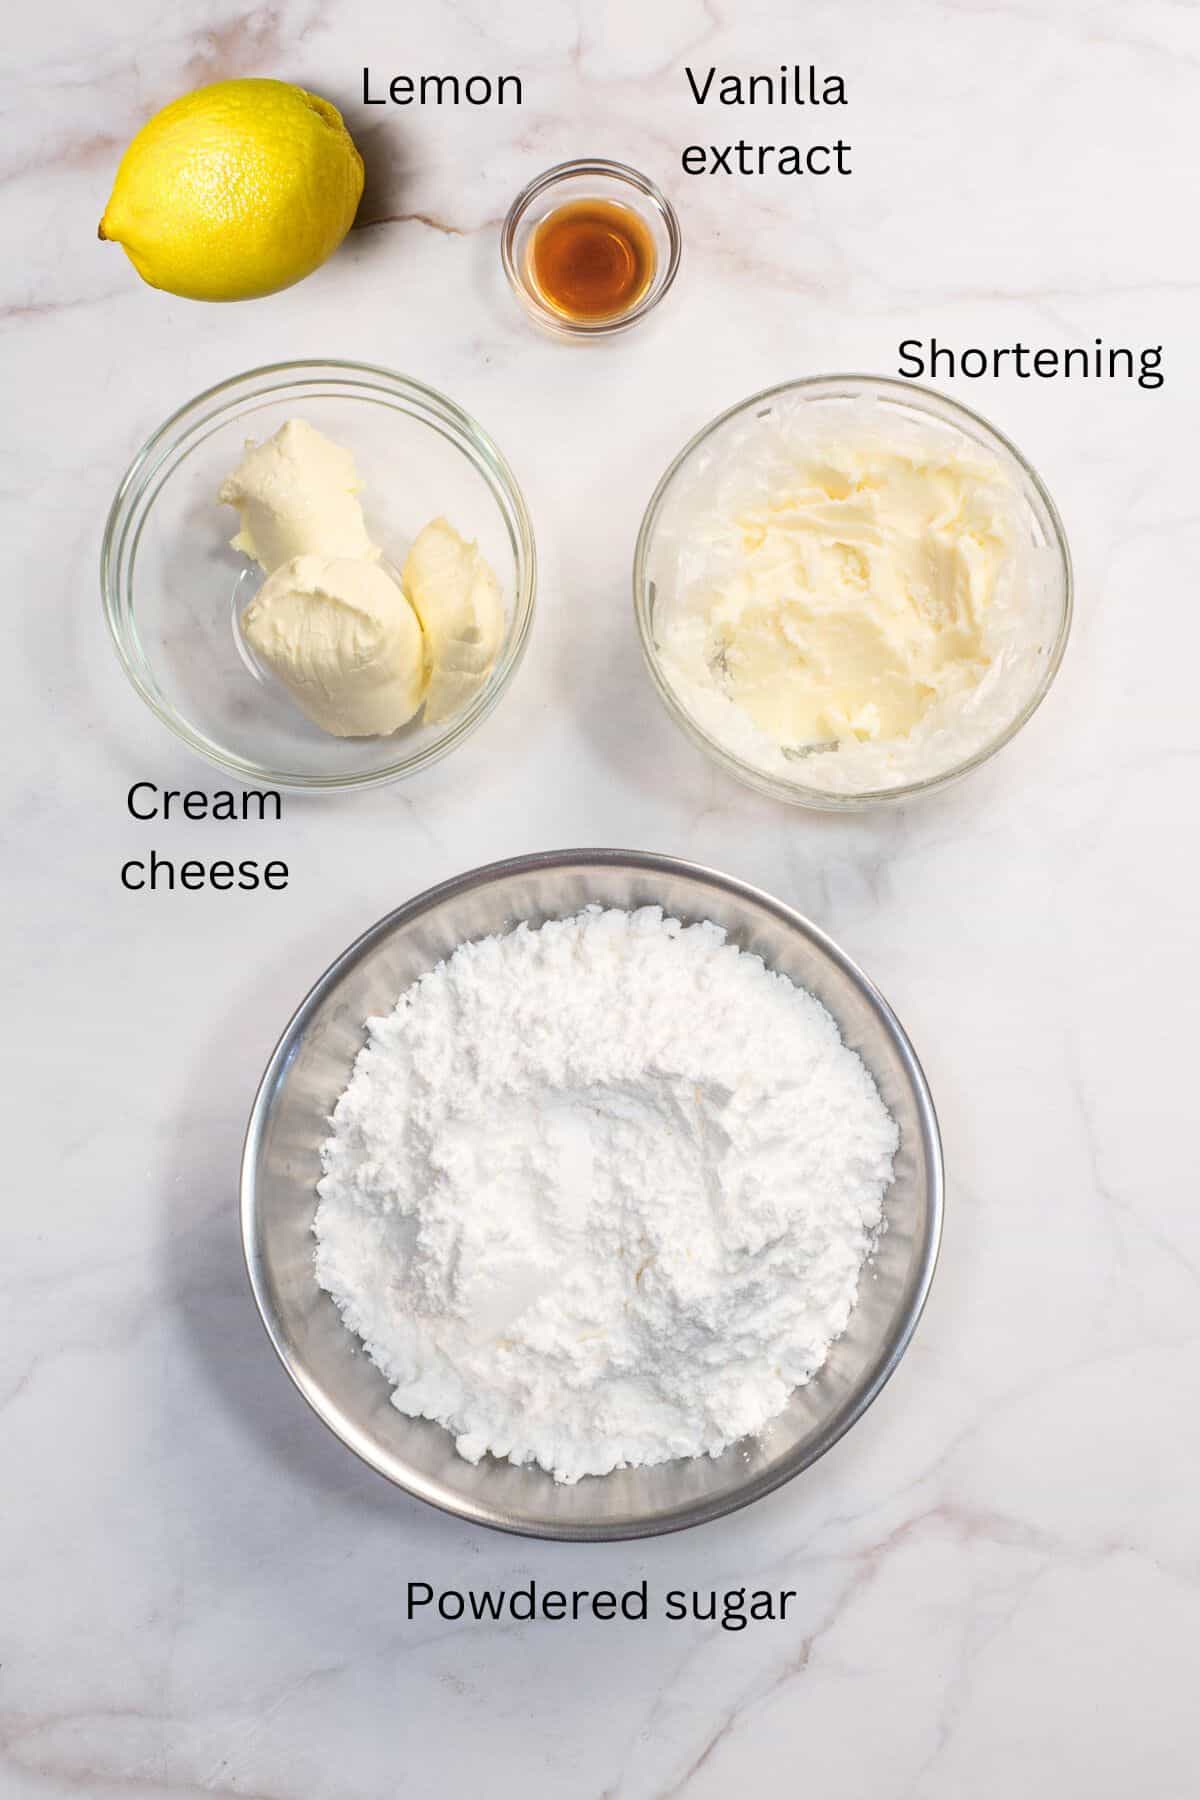 Lemon, vanilla extract, cream cheese, shortening and powdered sugar in bowls against a marble background.